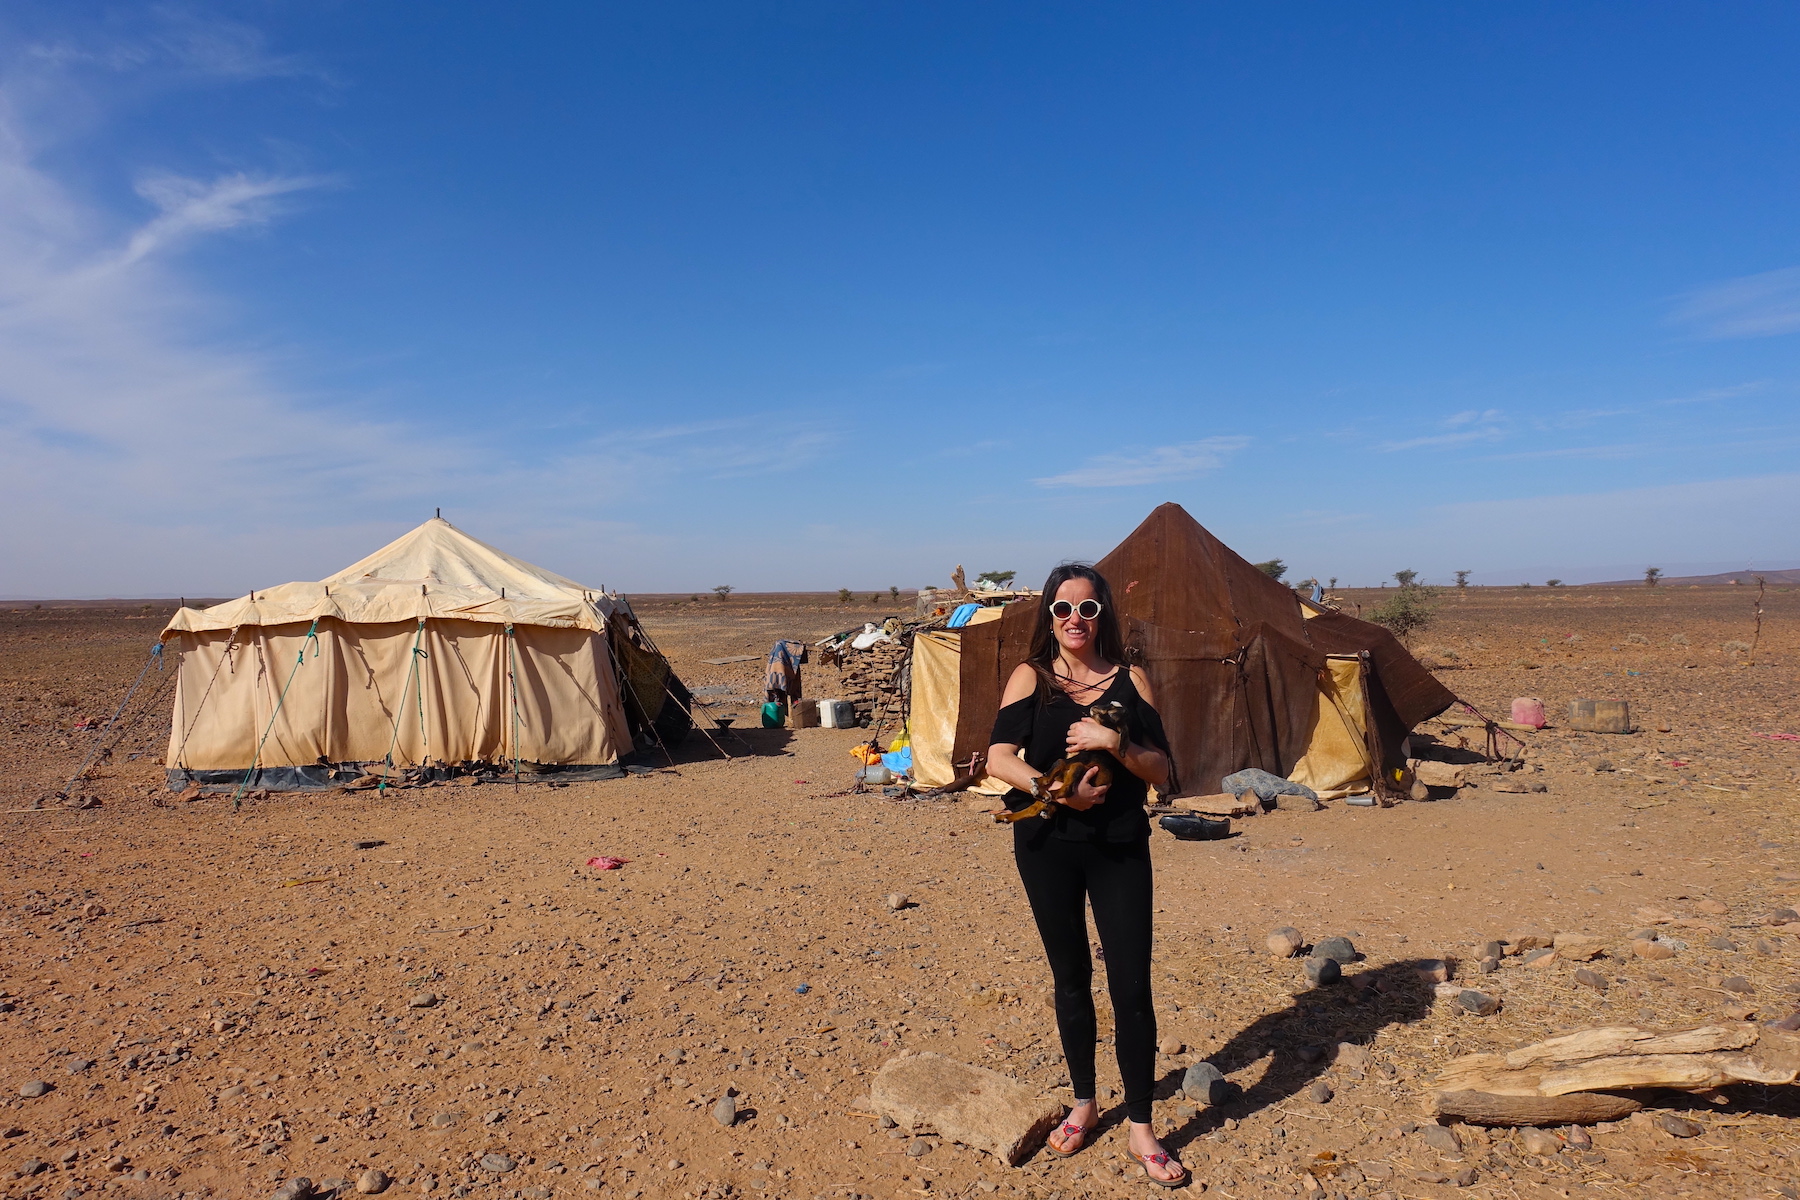 At the nomads camps in the Sahara desert hugging a baby goat